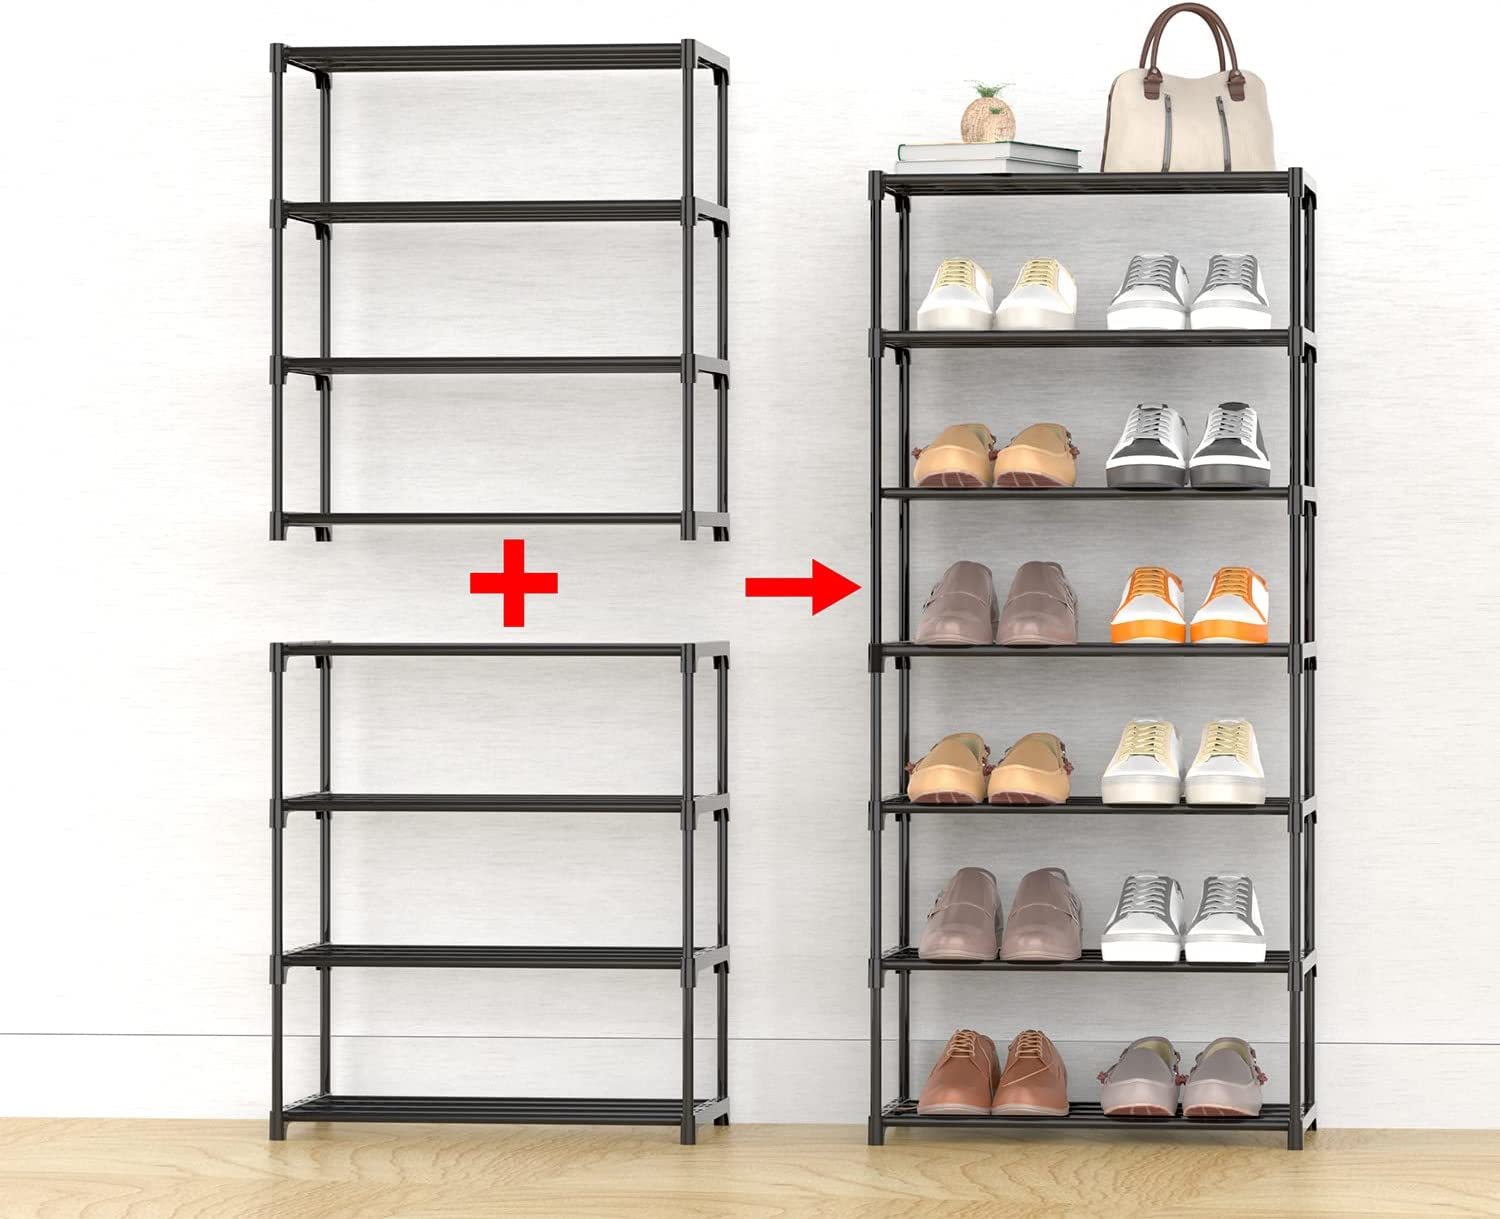  MAGINELS 6 Tier Shoe Rack Organizer with Cover, Slim